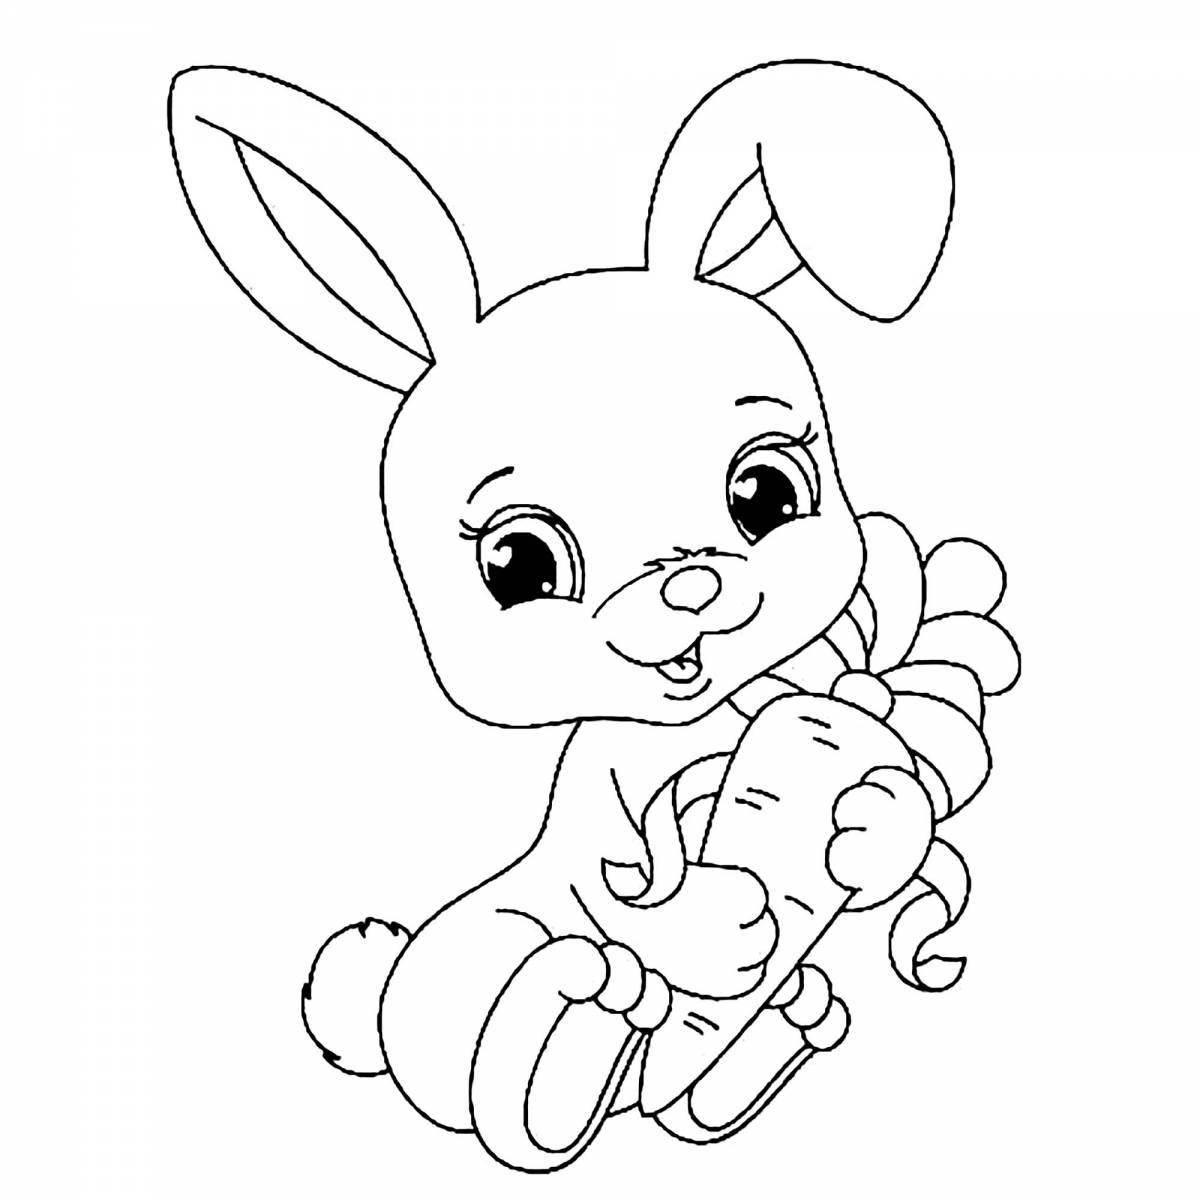 Coloring page glorious year of the rabbit